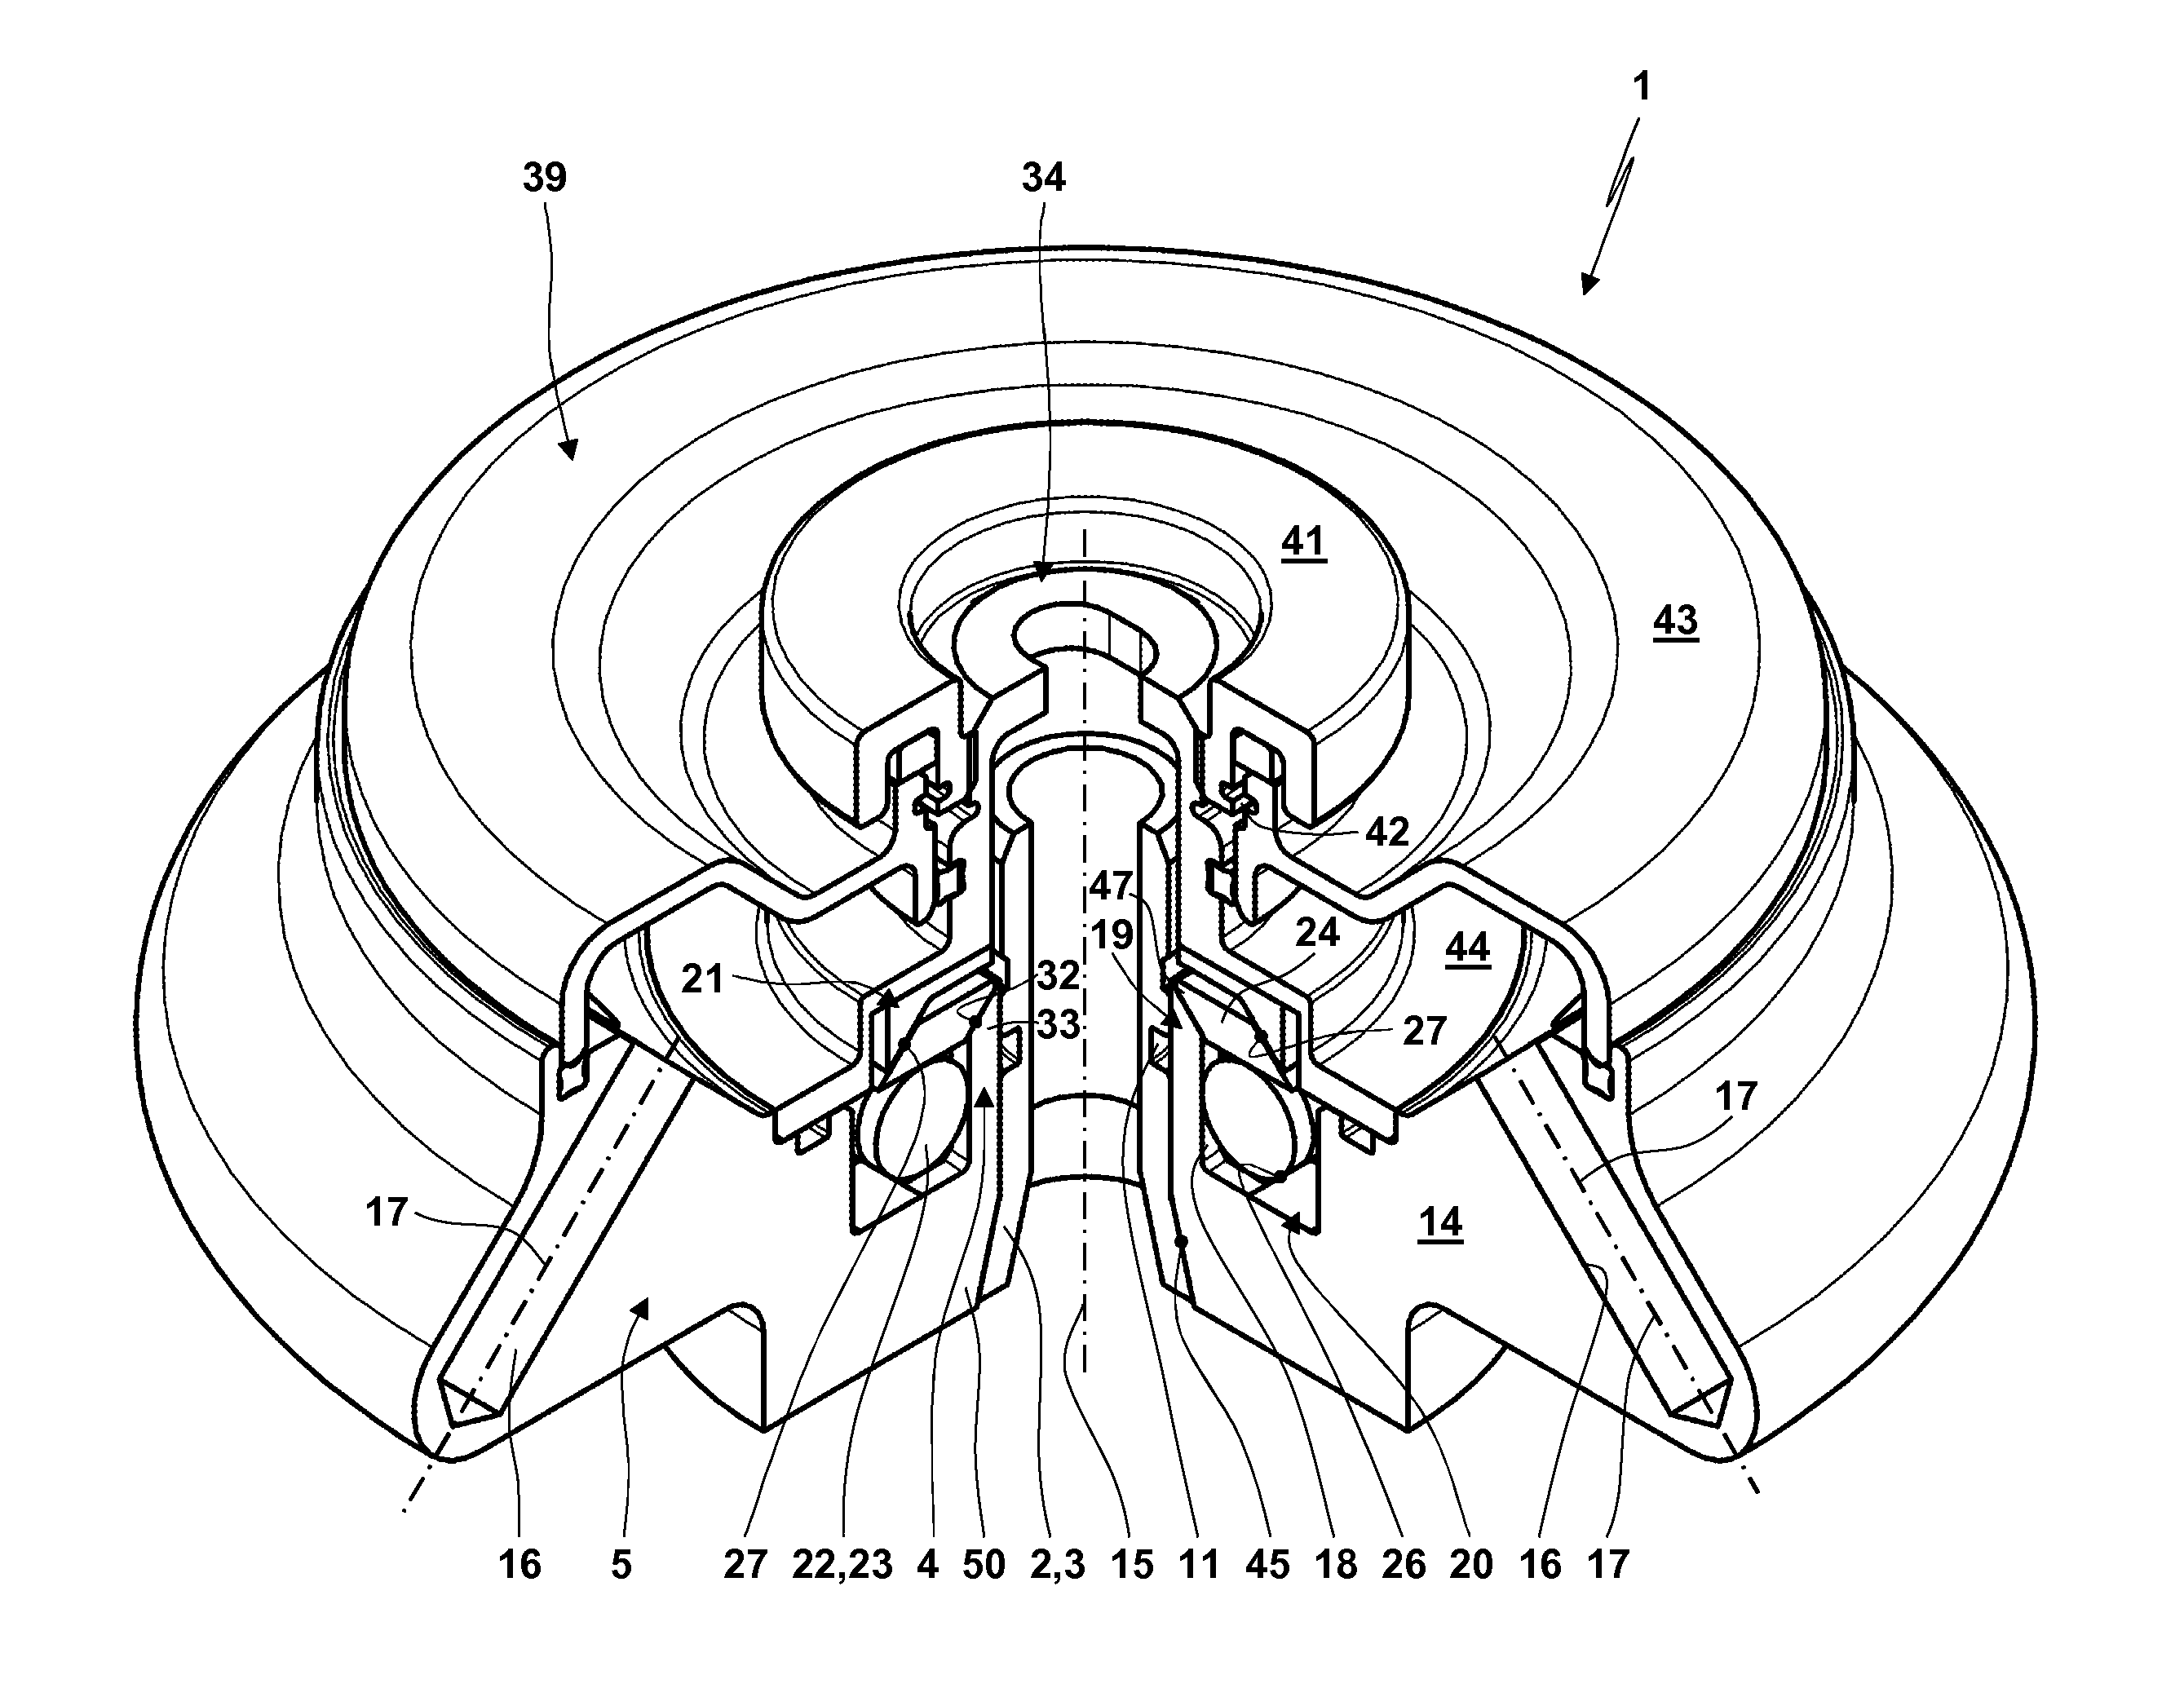 Coupling Device for a Laboratory Centrifuge Actuated by Centrifugal Force